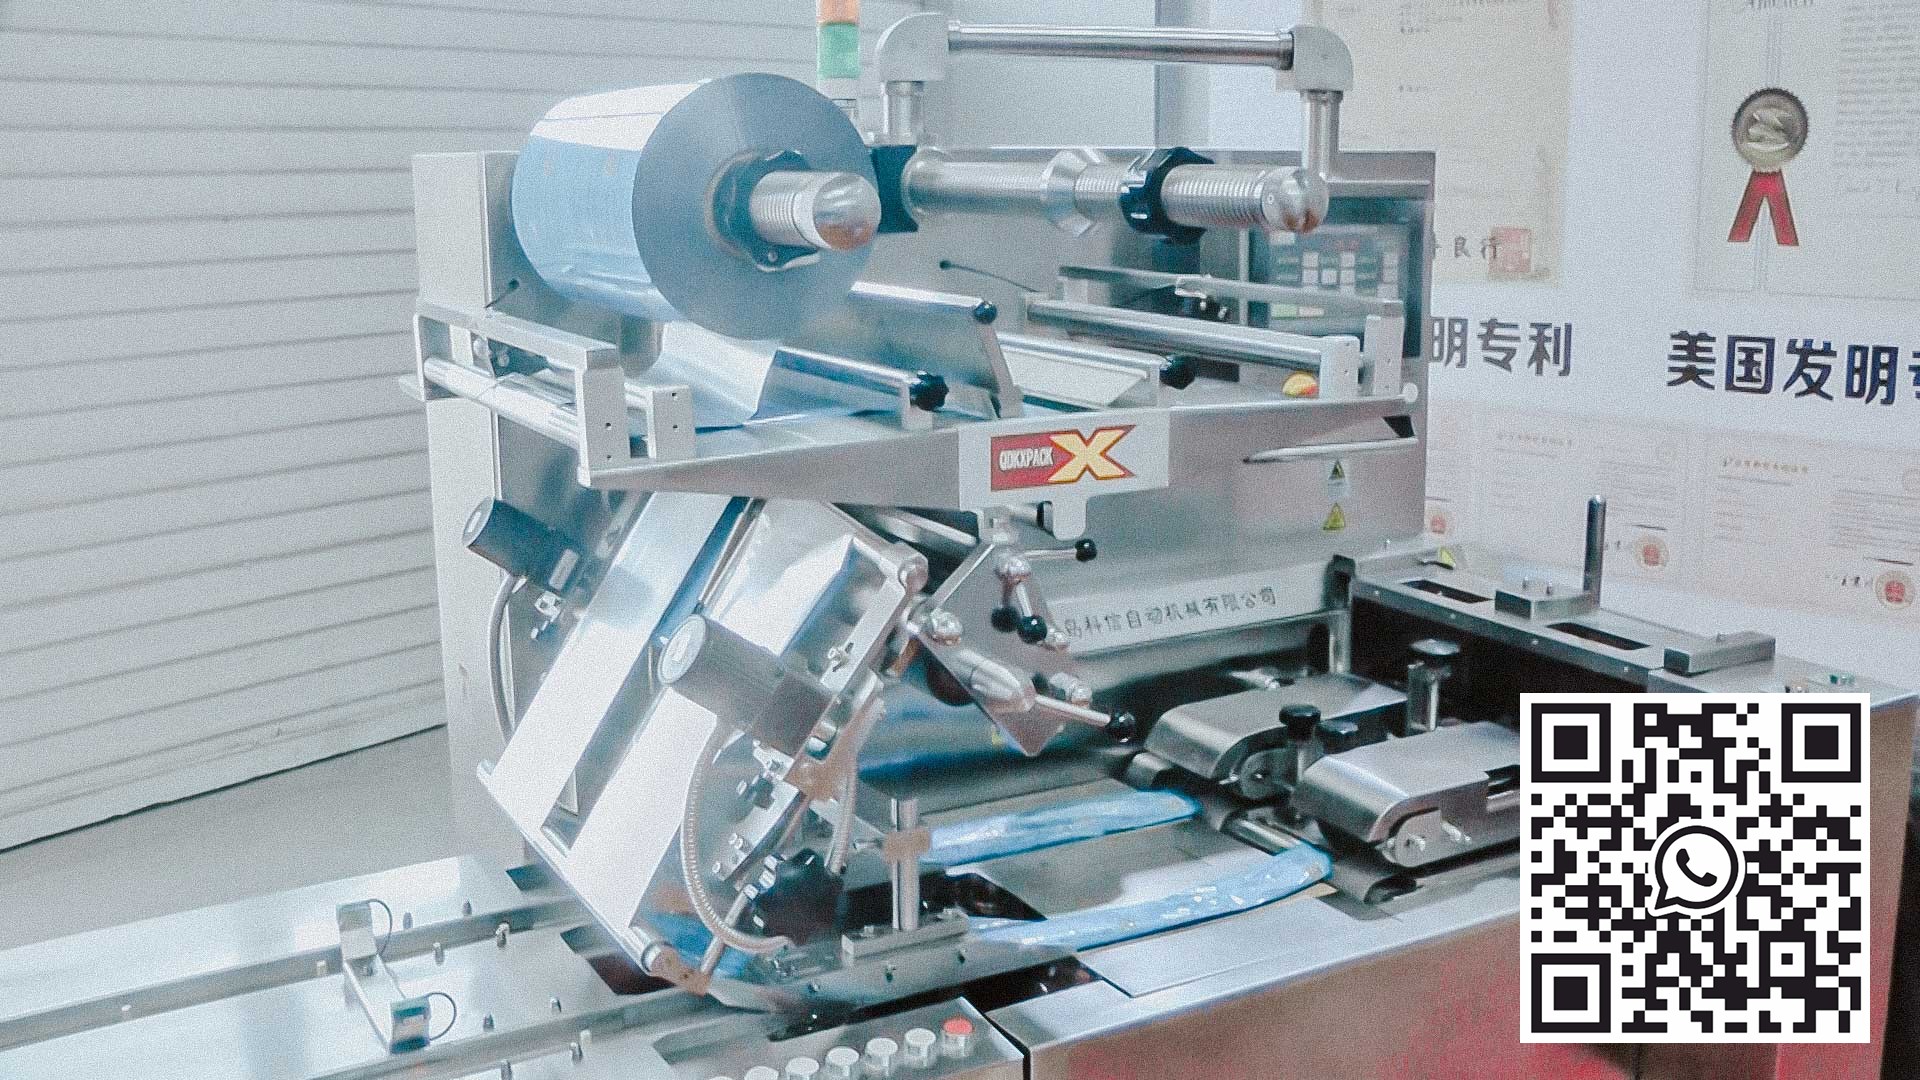 Automatic packaging machine to pack blisters with pills in plastic bag